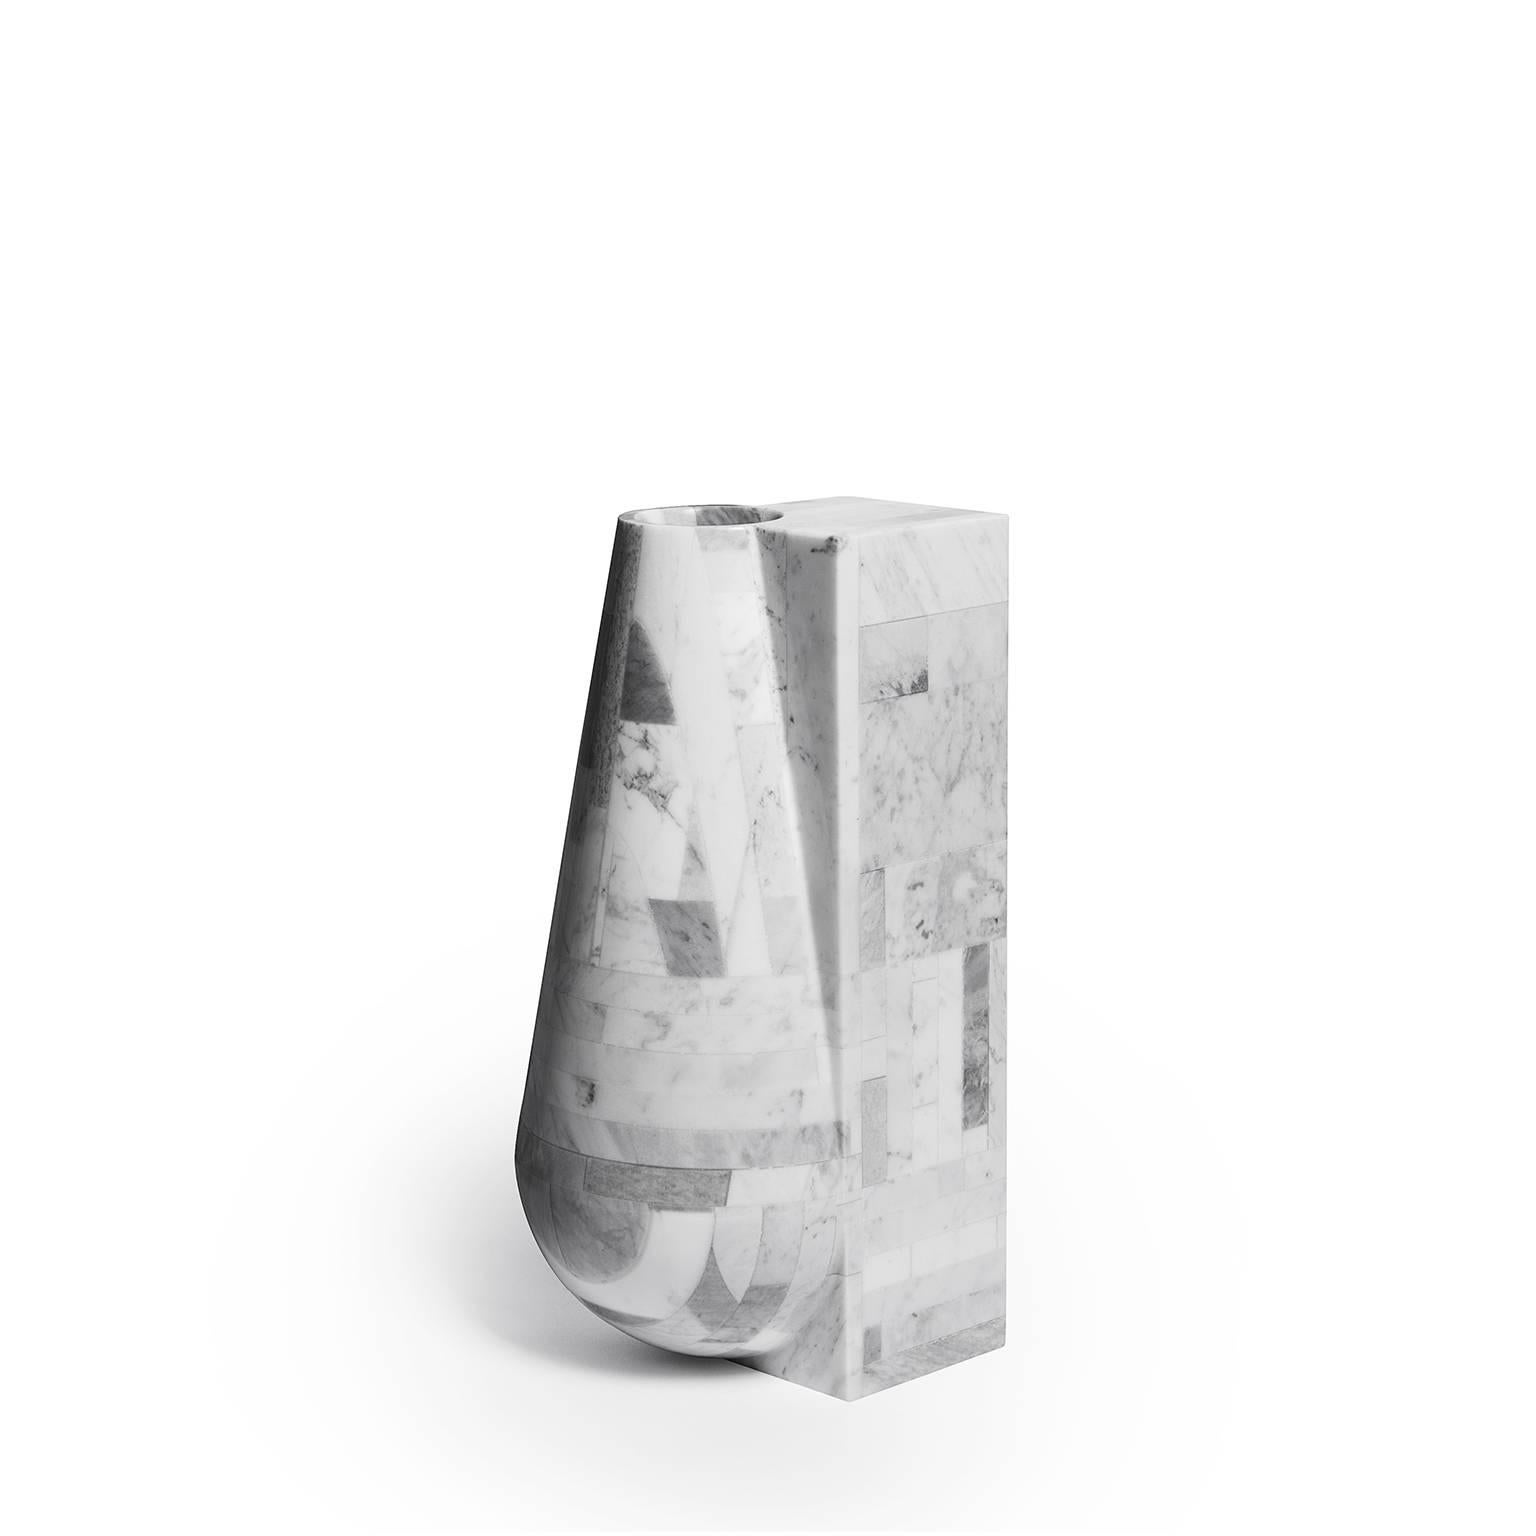 The idea comes up from the will to emphasise the contradictions of natural resource waste. Here the marble is recovered and assembled to make a 3D module. This module has been finished to highlight the contrast of the linear and geometric side with